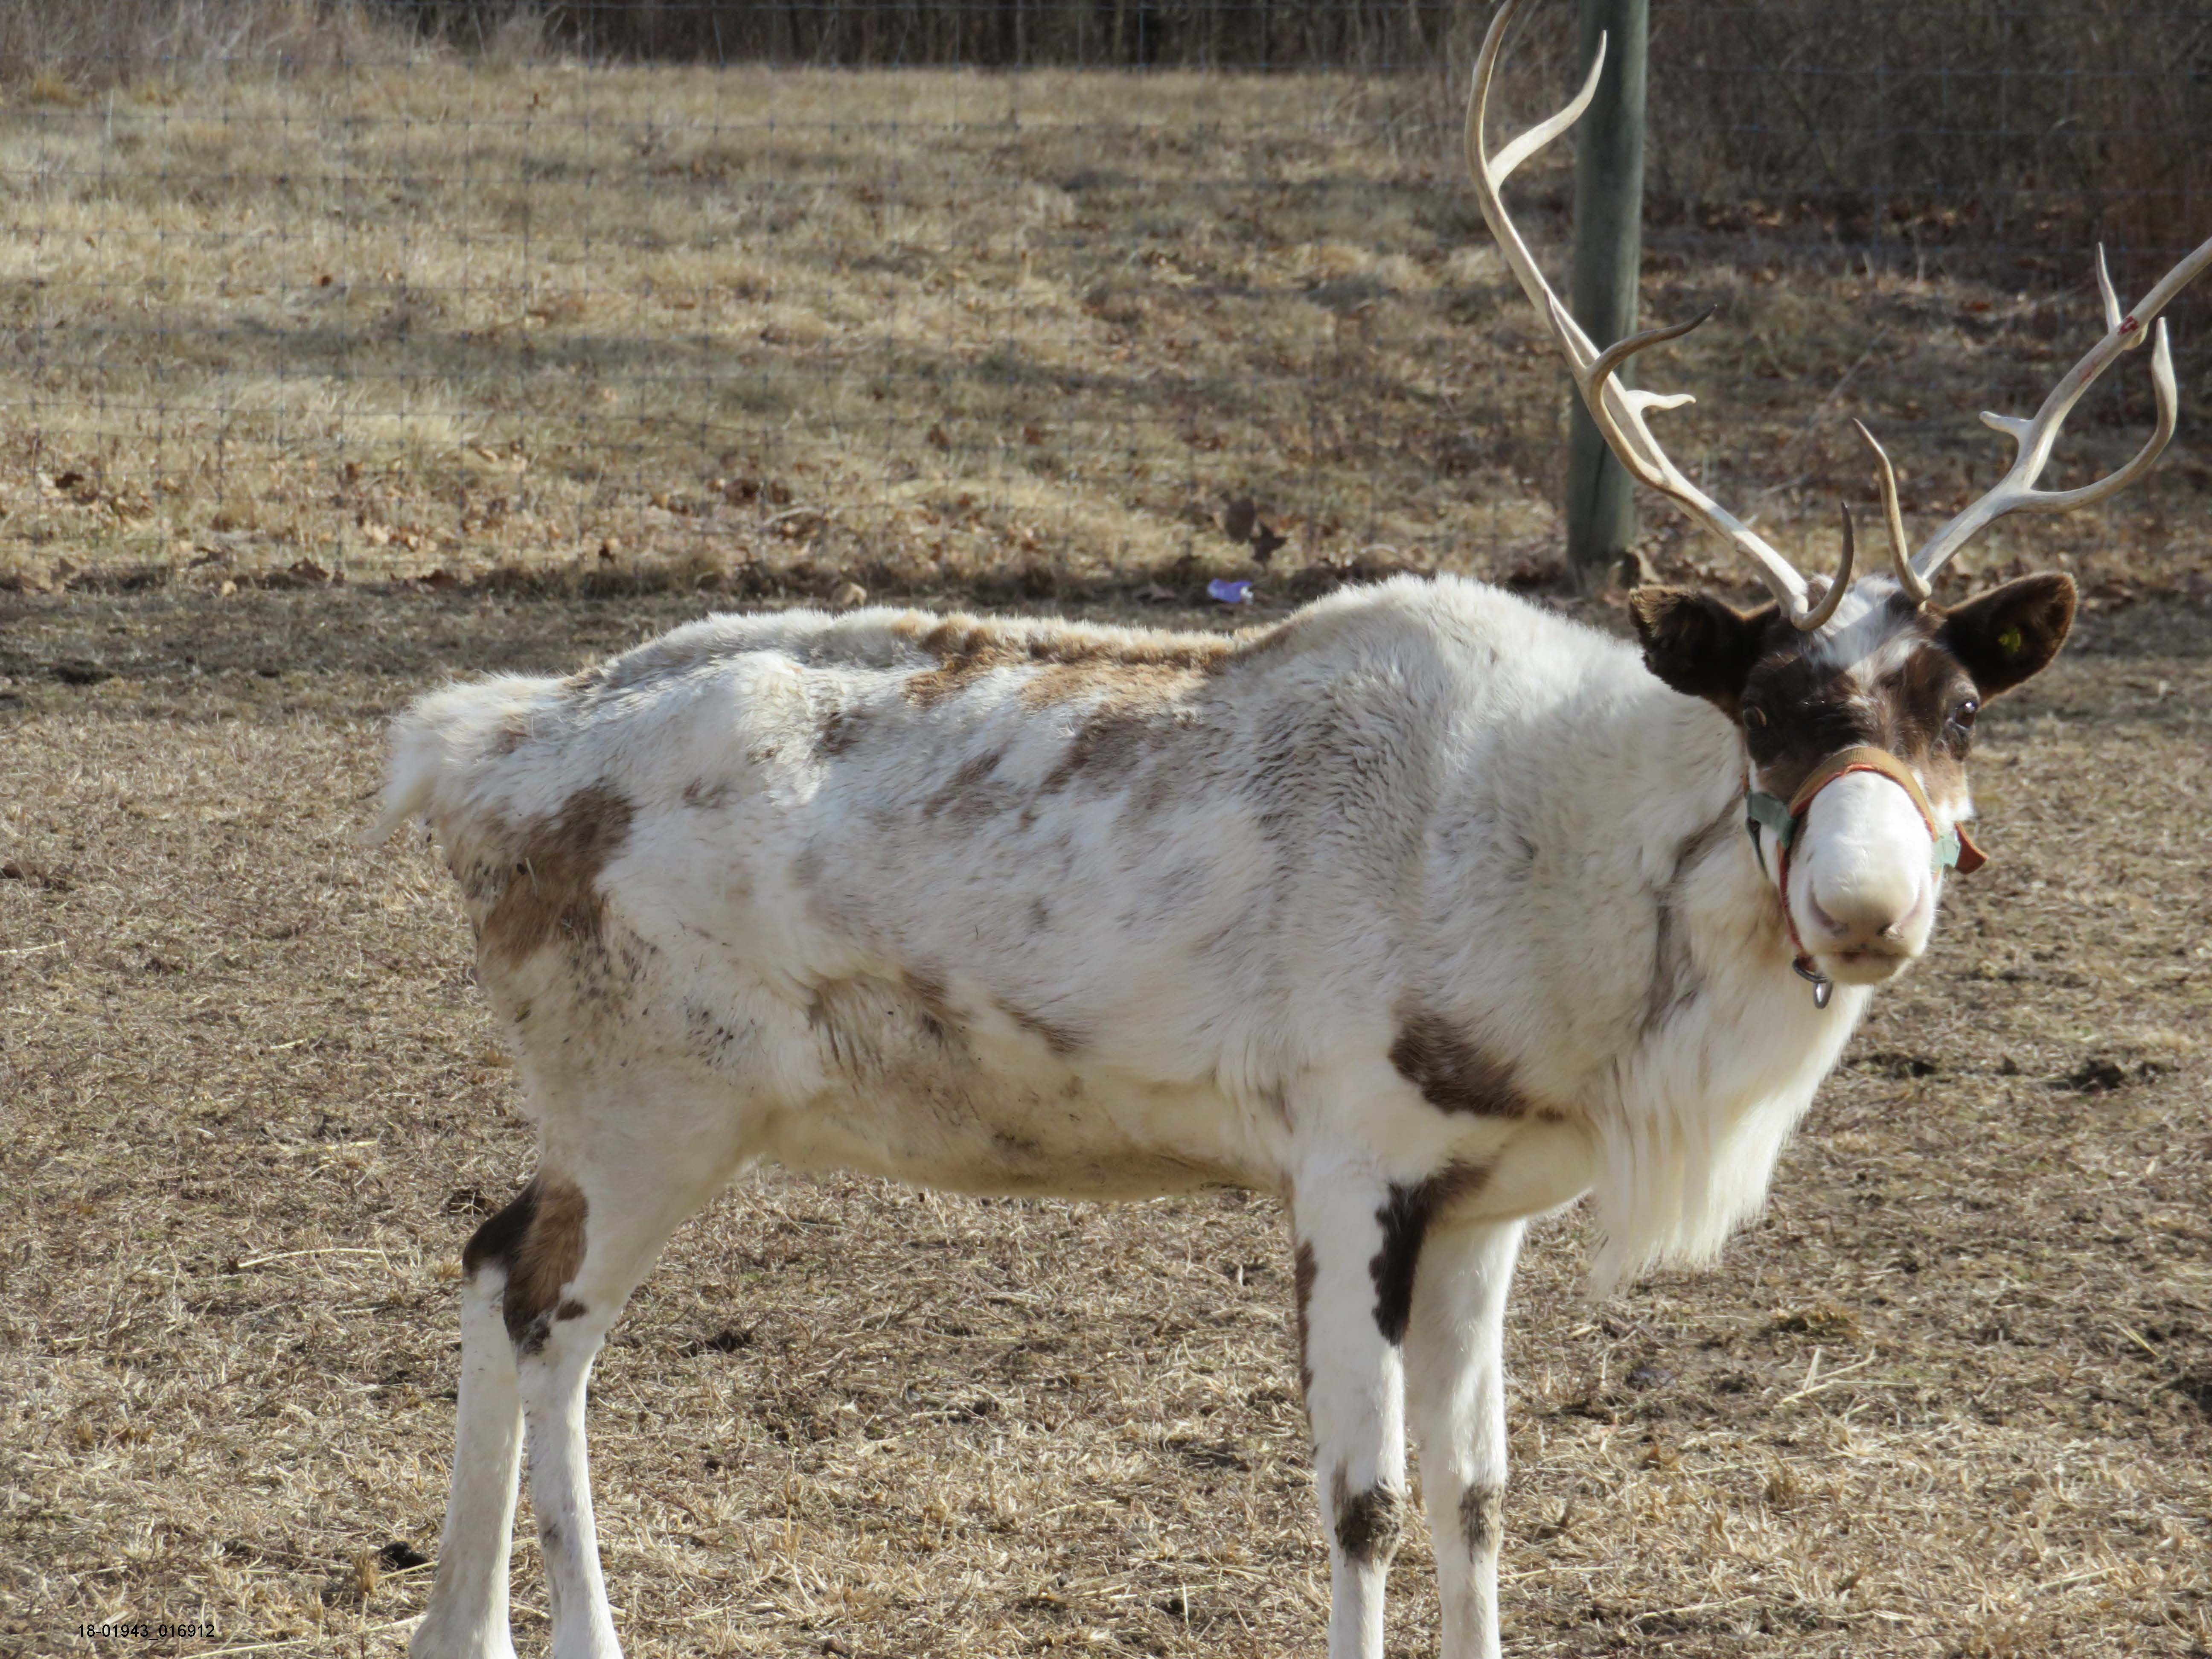 An underweight reindeer, who may have been used for Christmas events